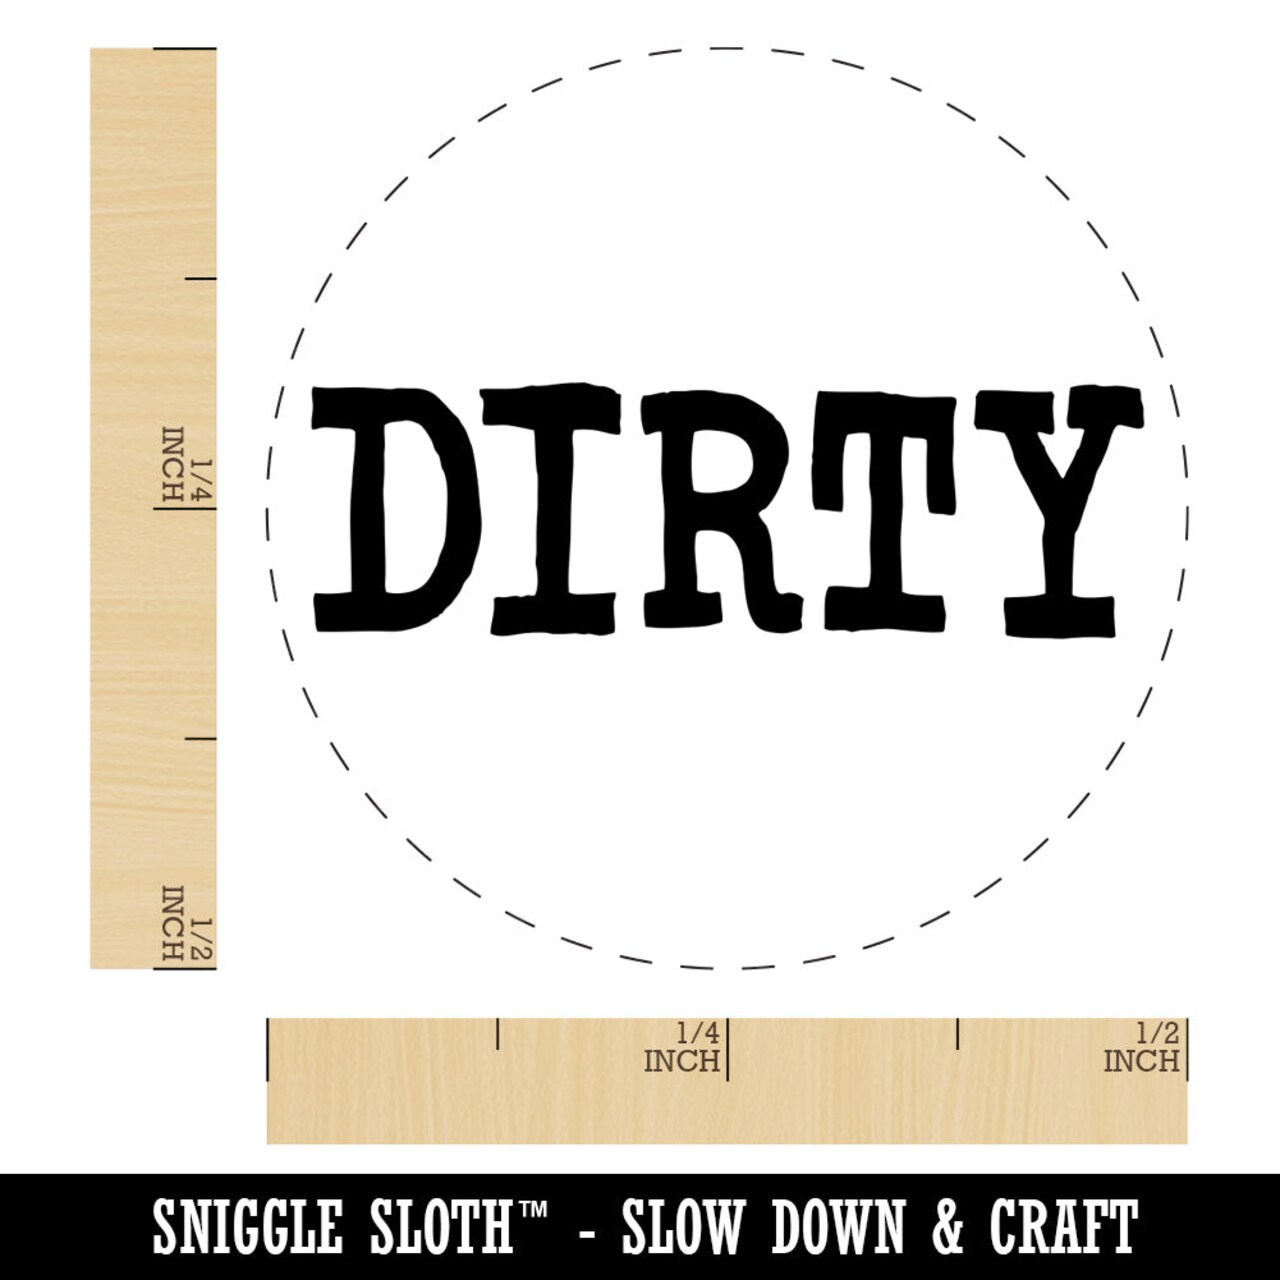 Dirty Fun Text Self-Inking Rubber Stamp for Stamping Crafting Planners